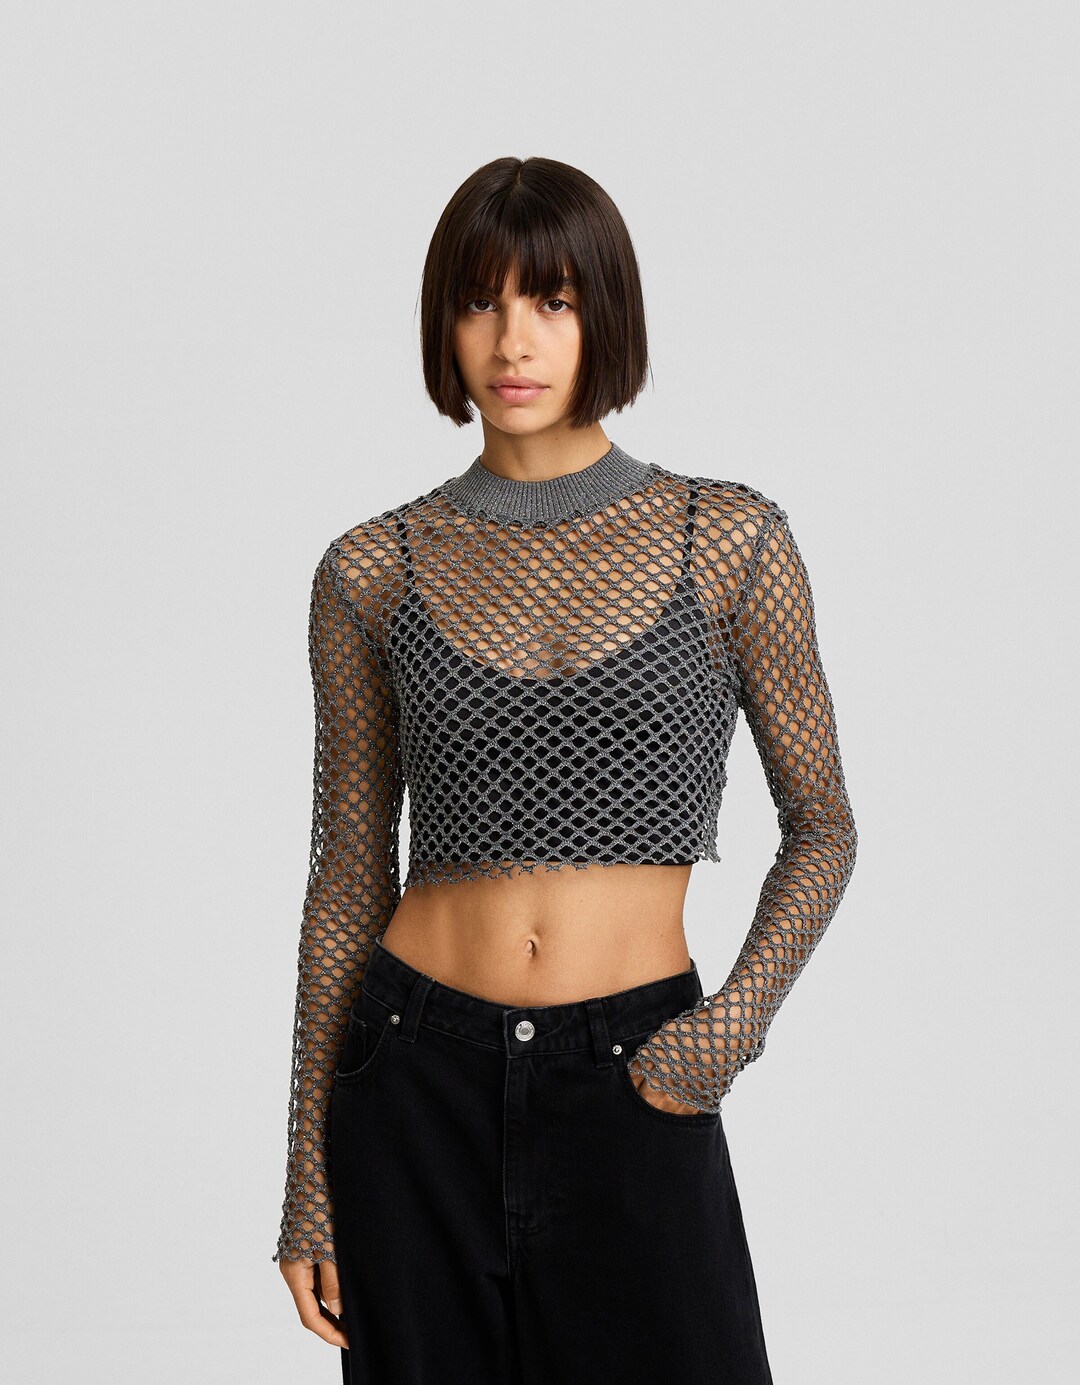 Shimmery mesh sweater